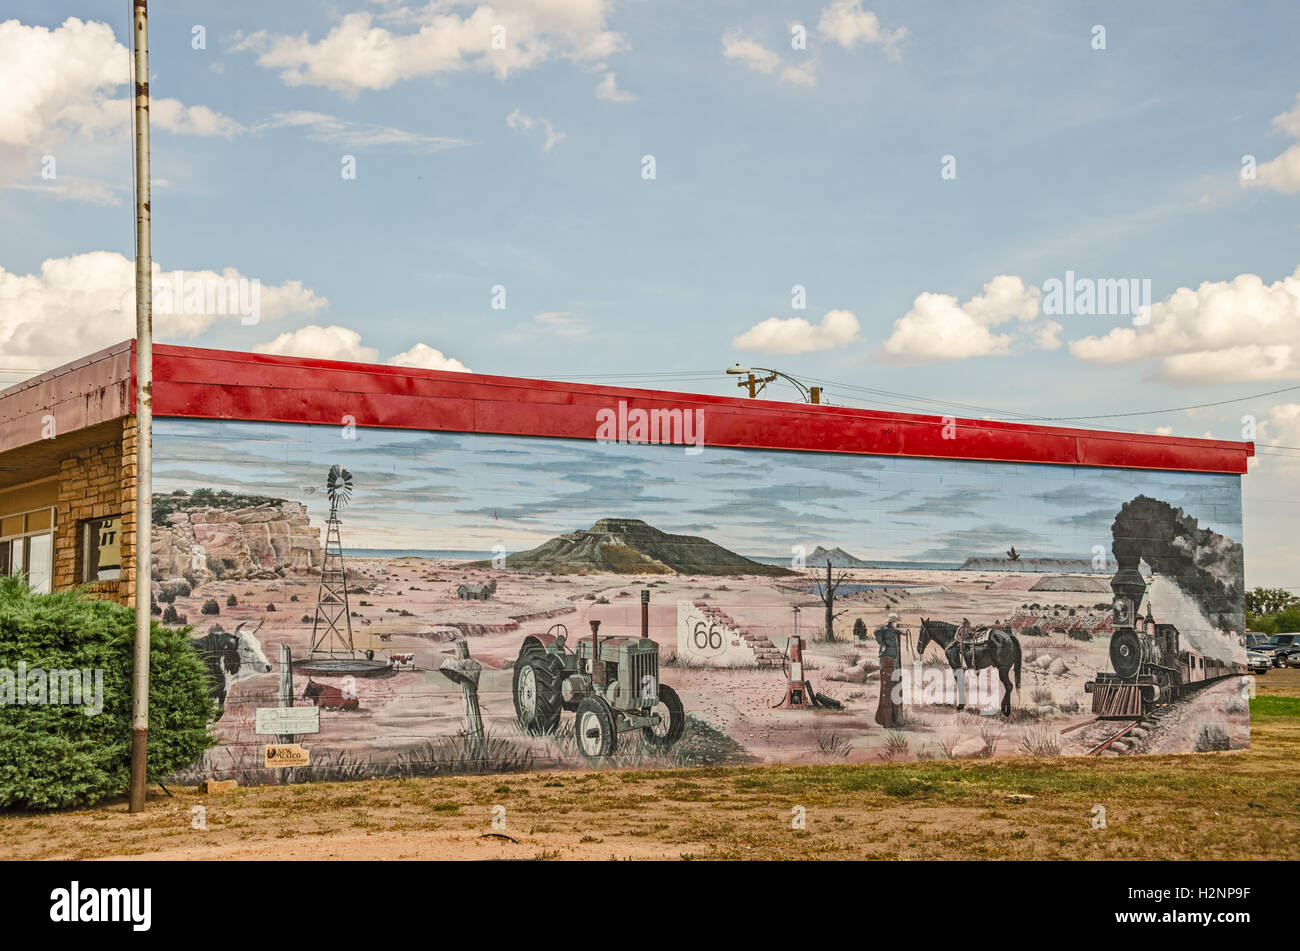 TUCUMCARI, NEW MEXICO - AUGUST 25, 2013:  Photo of a mural depicting Route 66 in the Land of Enchantment Stock Photo